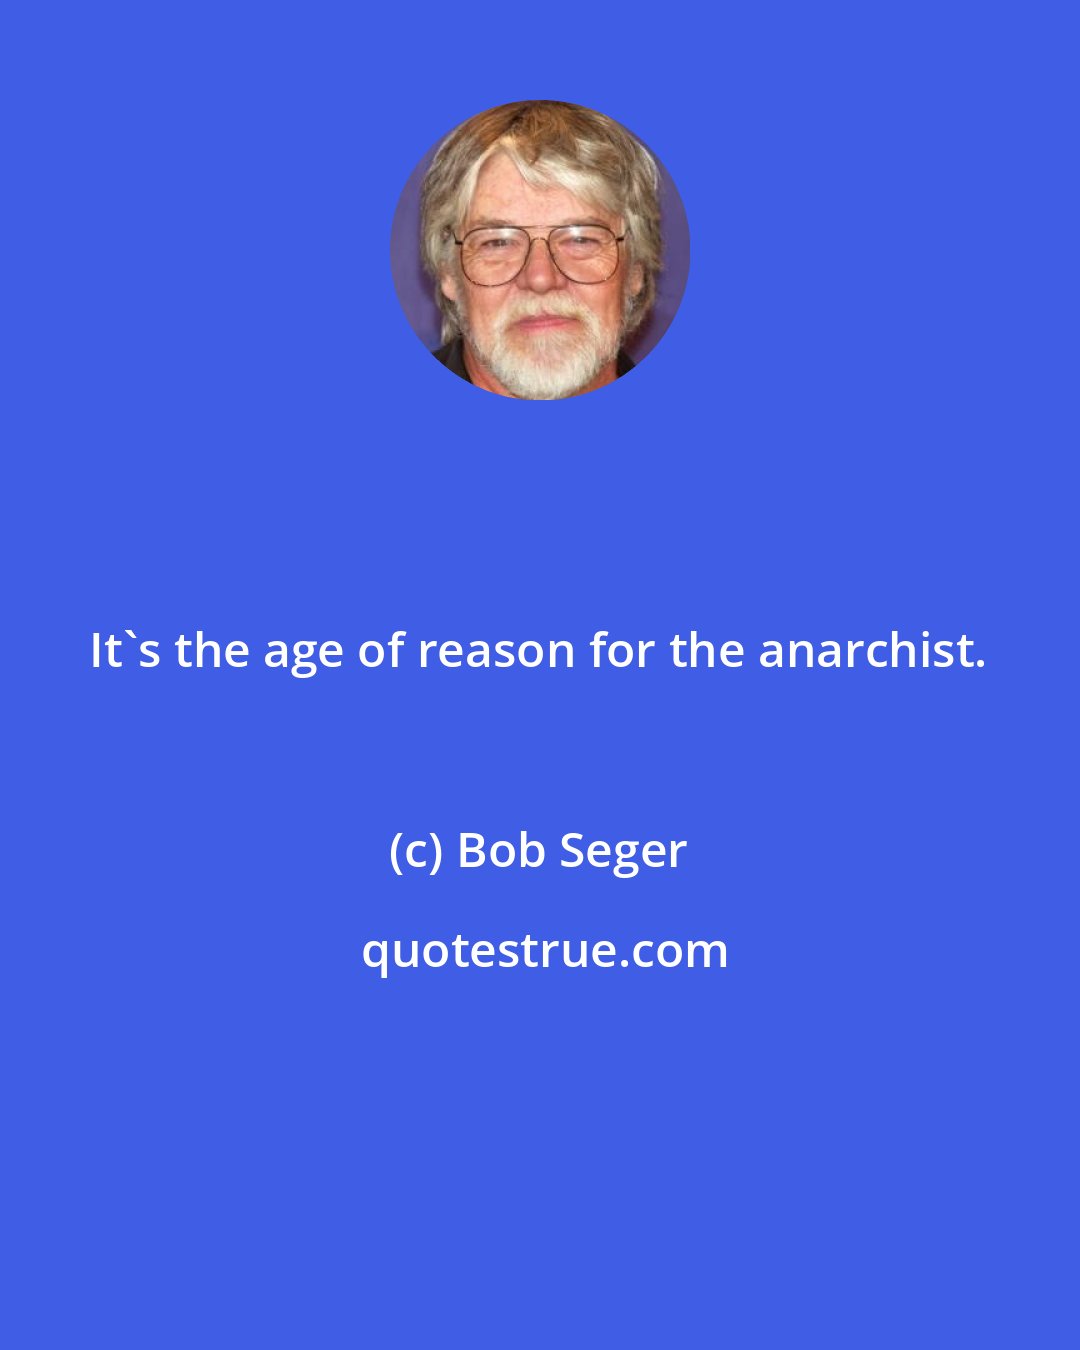 Bob Seger: It's the age of reason for the anarchist.